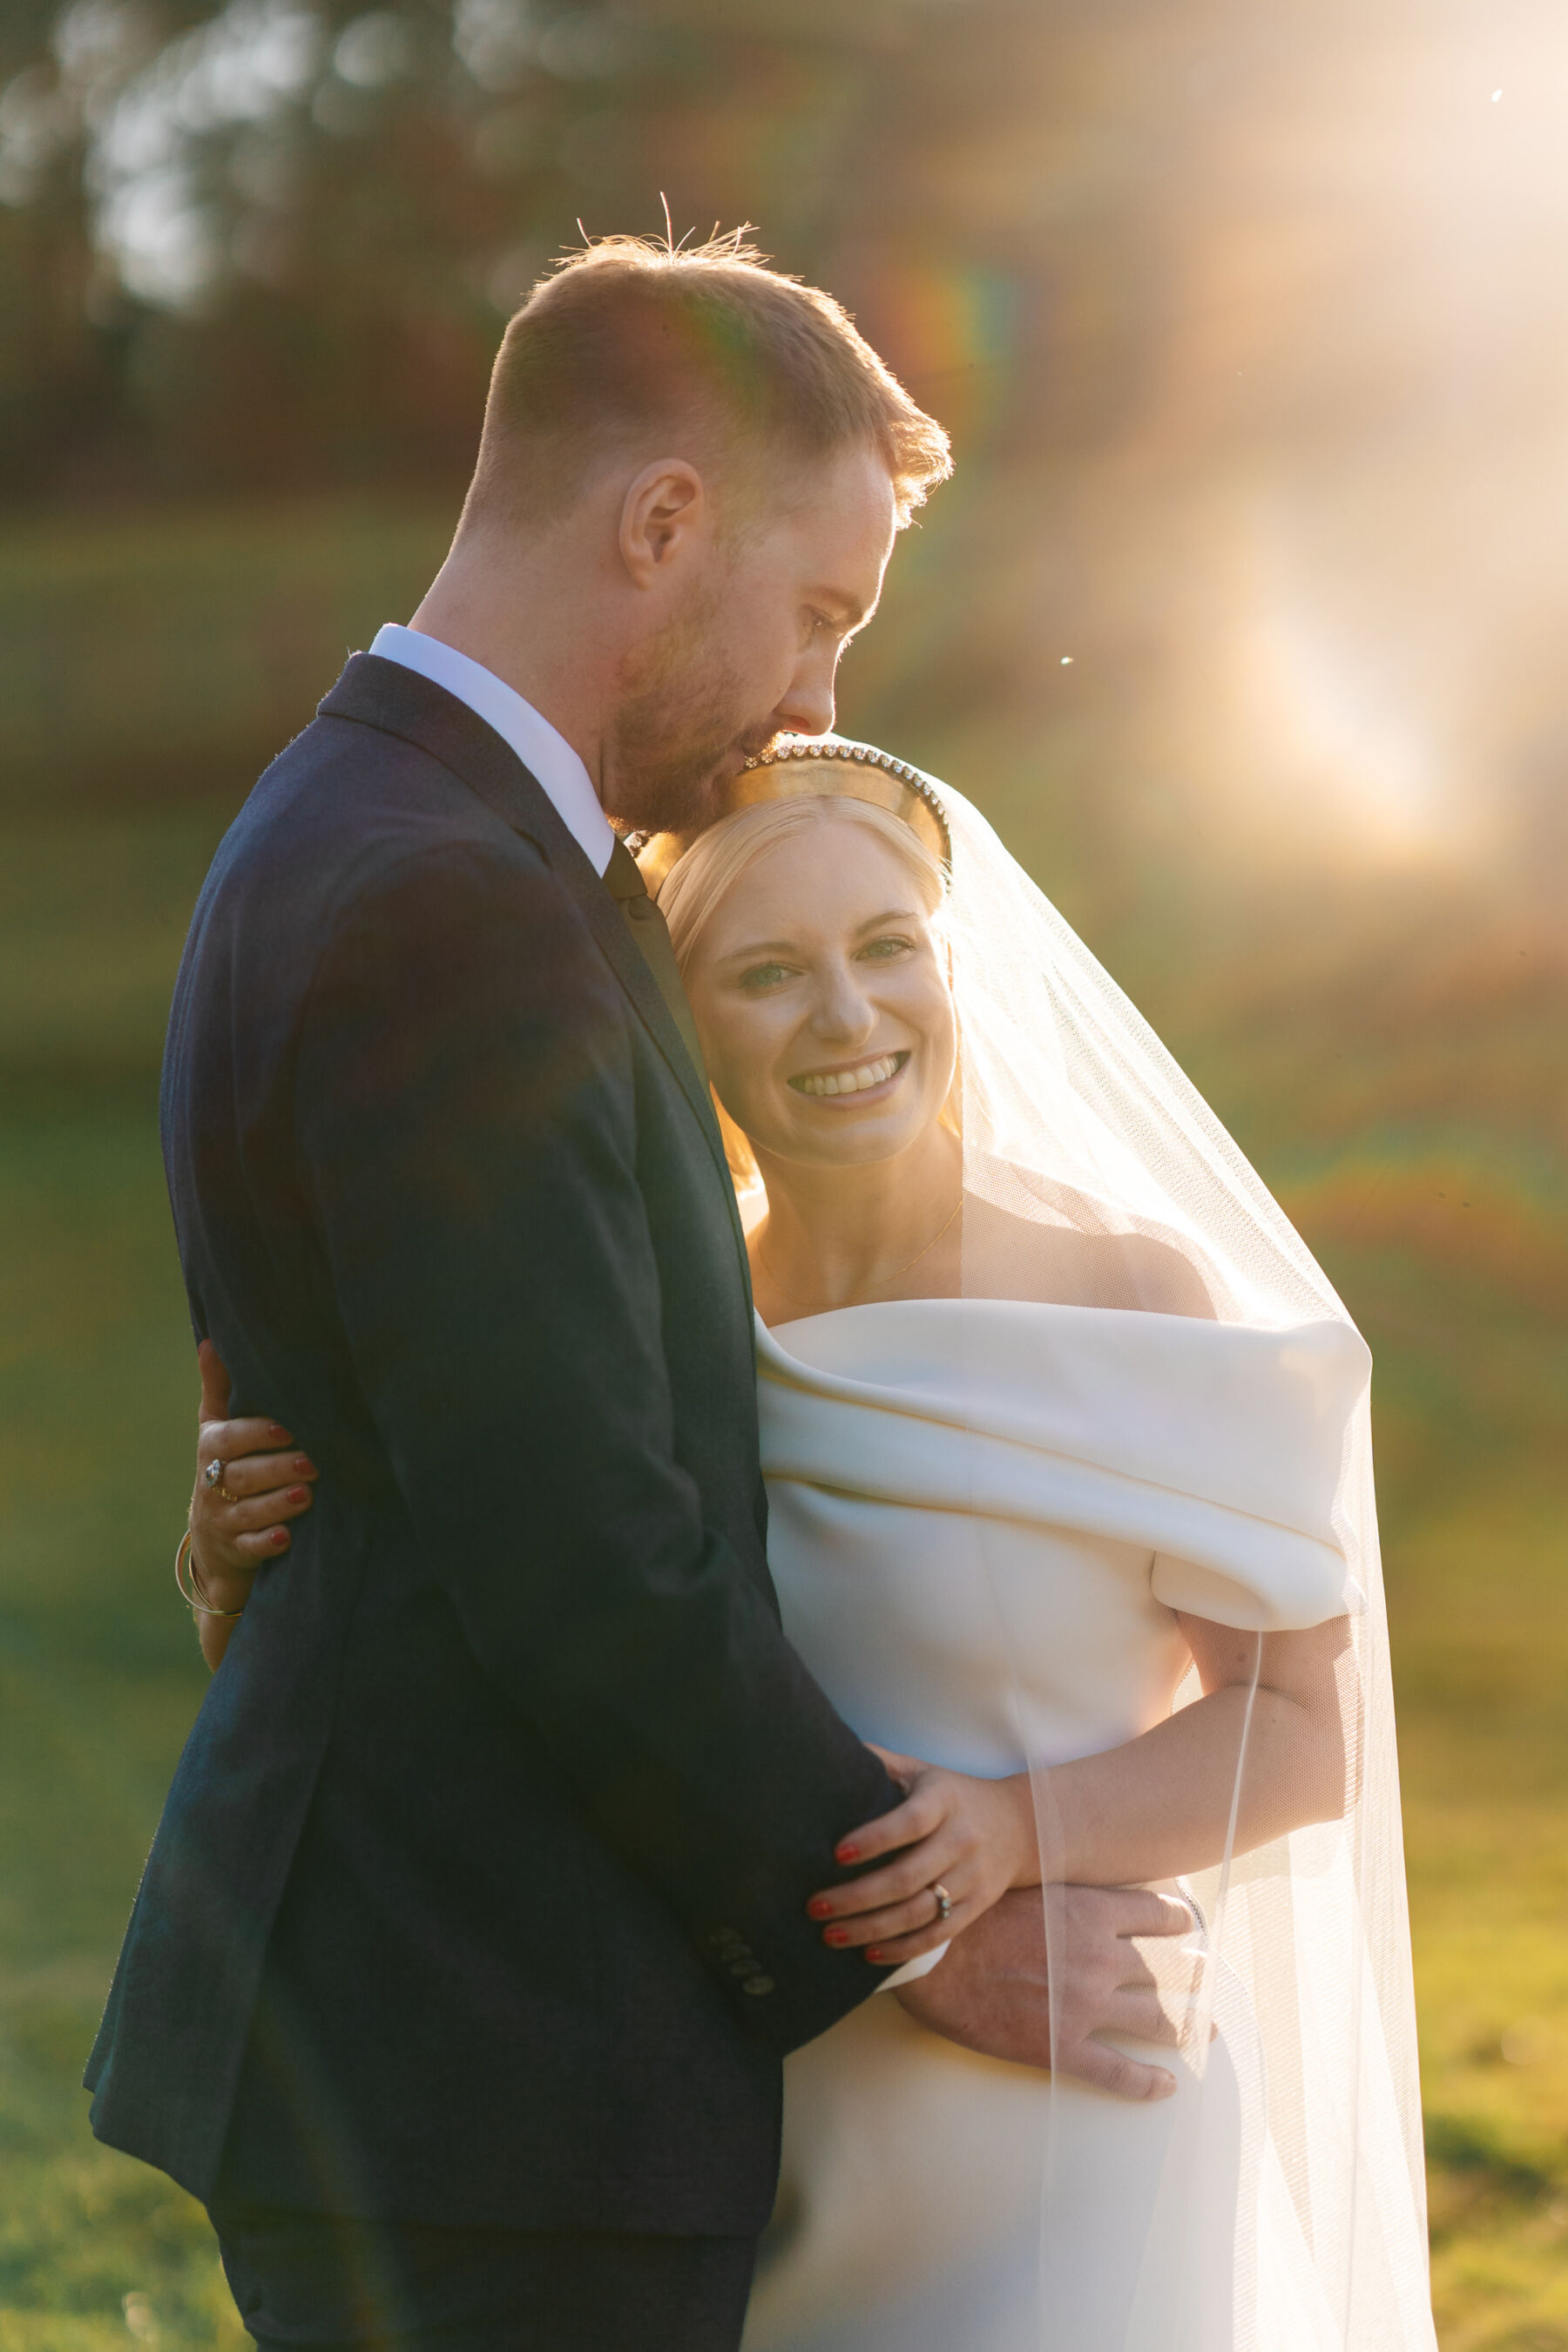 Golden hour shot of modern bride wearing a Toni Maticevski wedding dress as she is embraced by her groom.